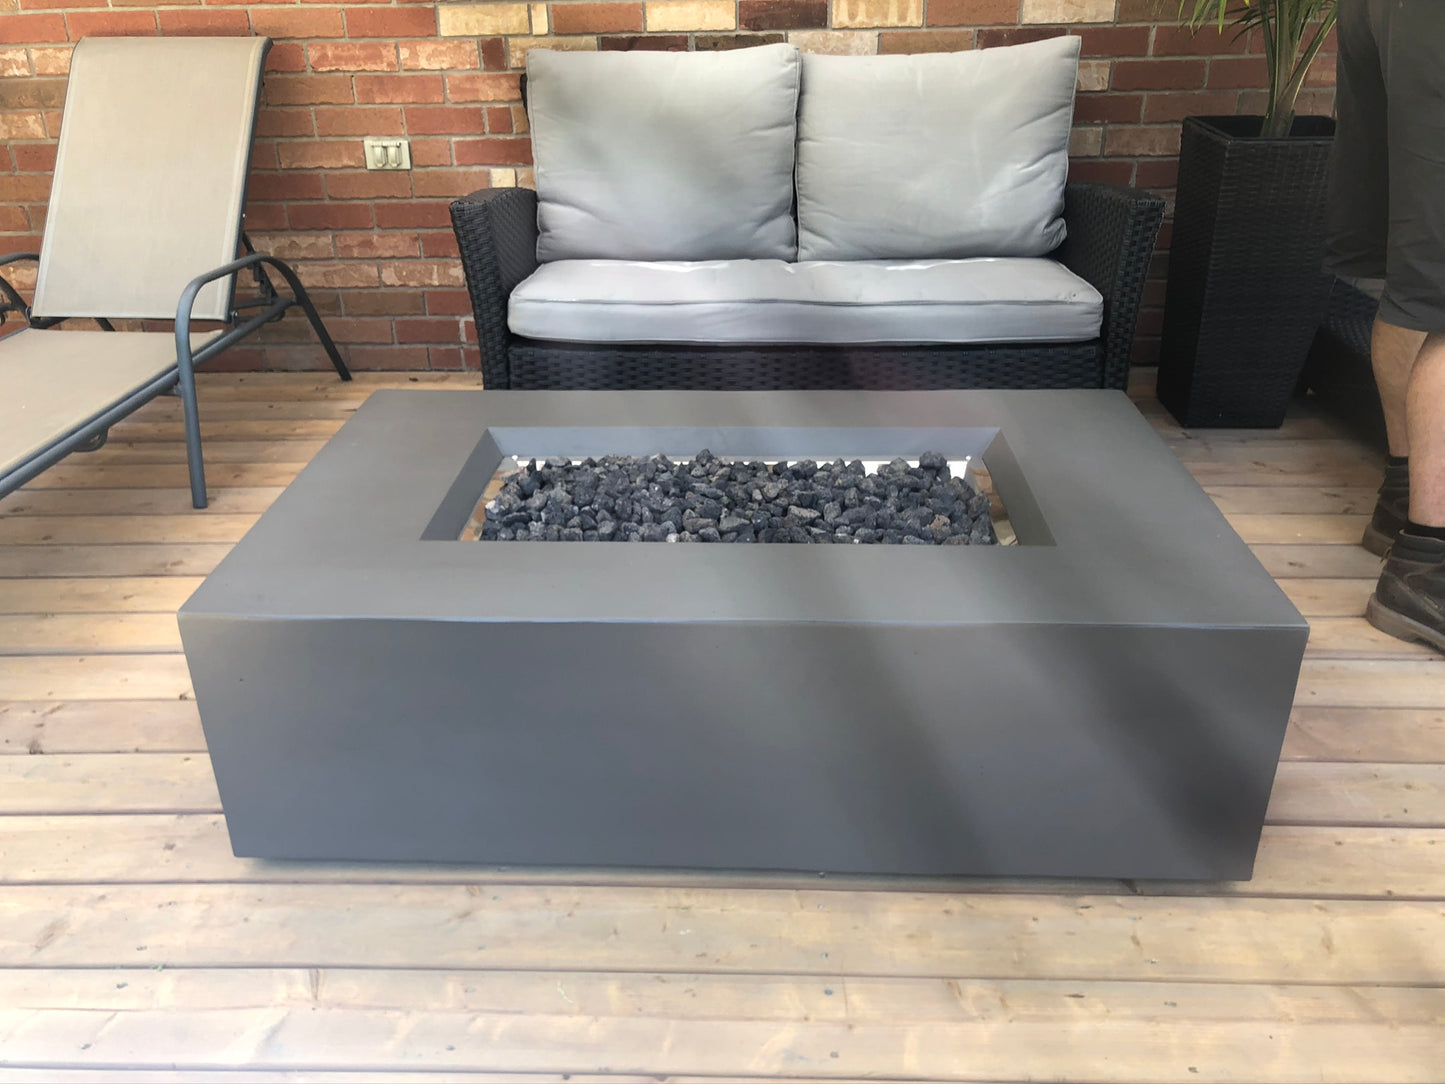 Napoleon Uptown Patio Flame Fire Table